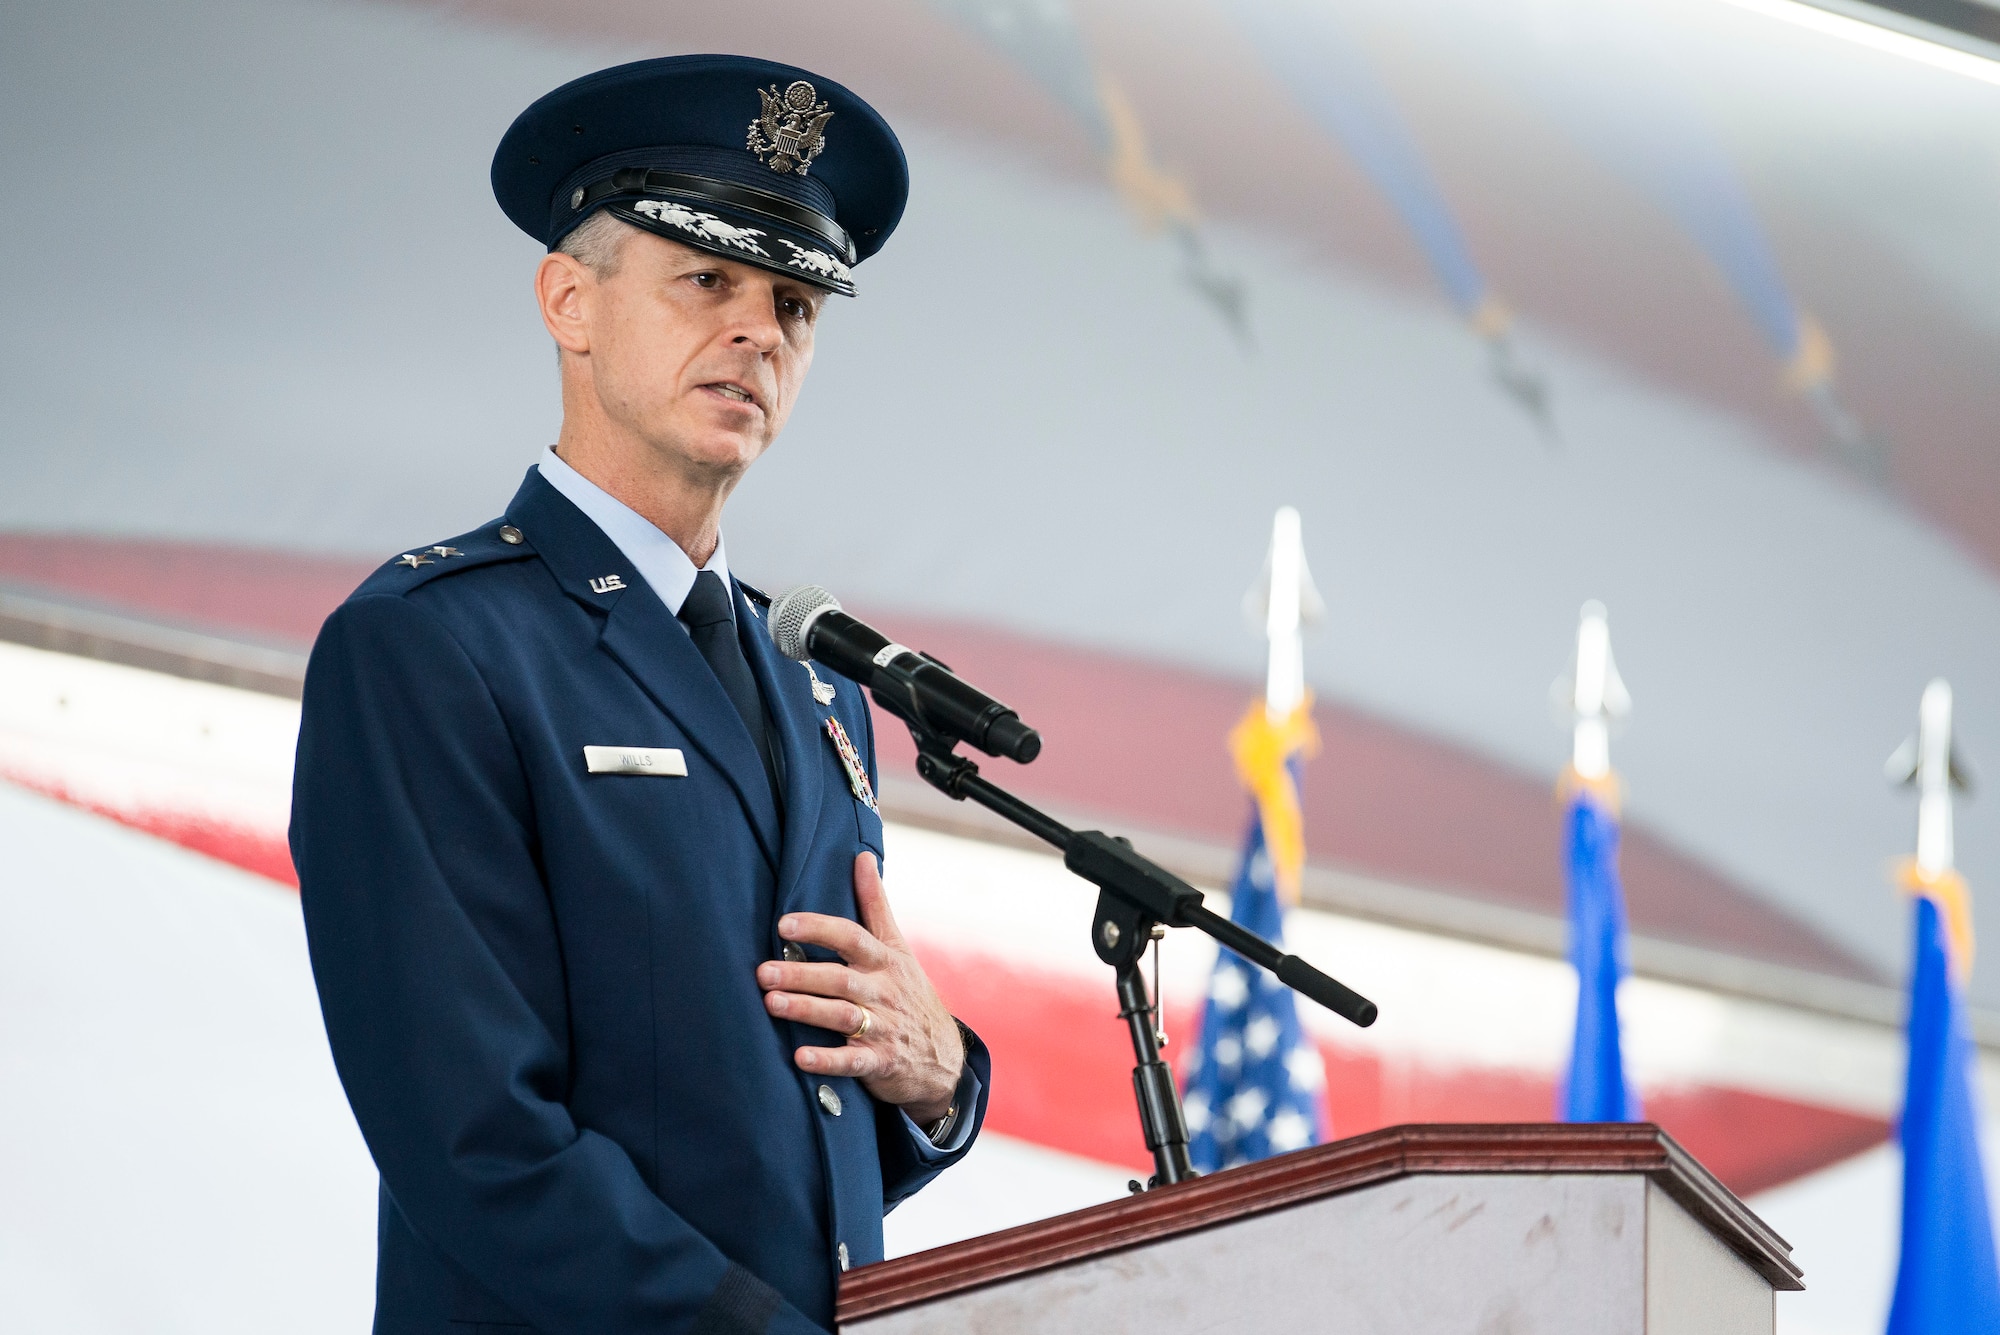 Maj. Gen. Craig Wills, 19th Air Force commander, addresses the men and women of the 19th Air Force for the first time as their commander during a change of command ceremony June 13, 2019, at Joint Base San Antonio-Randolph, Texas. Wills was previously the deputy chief of the Office of Security Cooperation-Iraq.  He is a command pilot with more than 2,500 hours of flying time, primarily in the F-15C and F-15E. (U.S. Air Force photo by Sean M. Worrell)